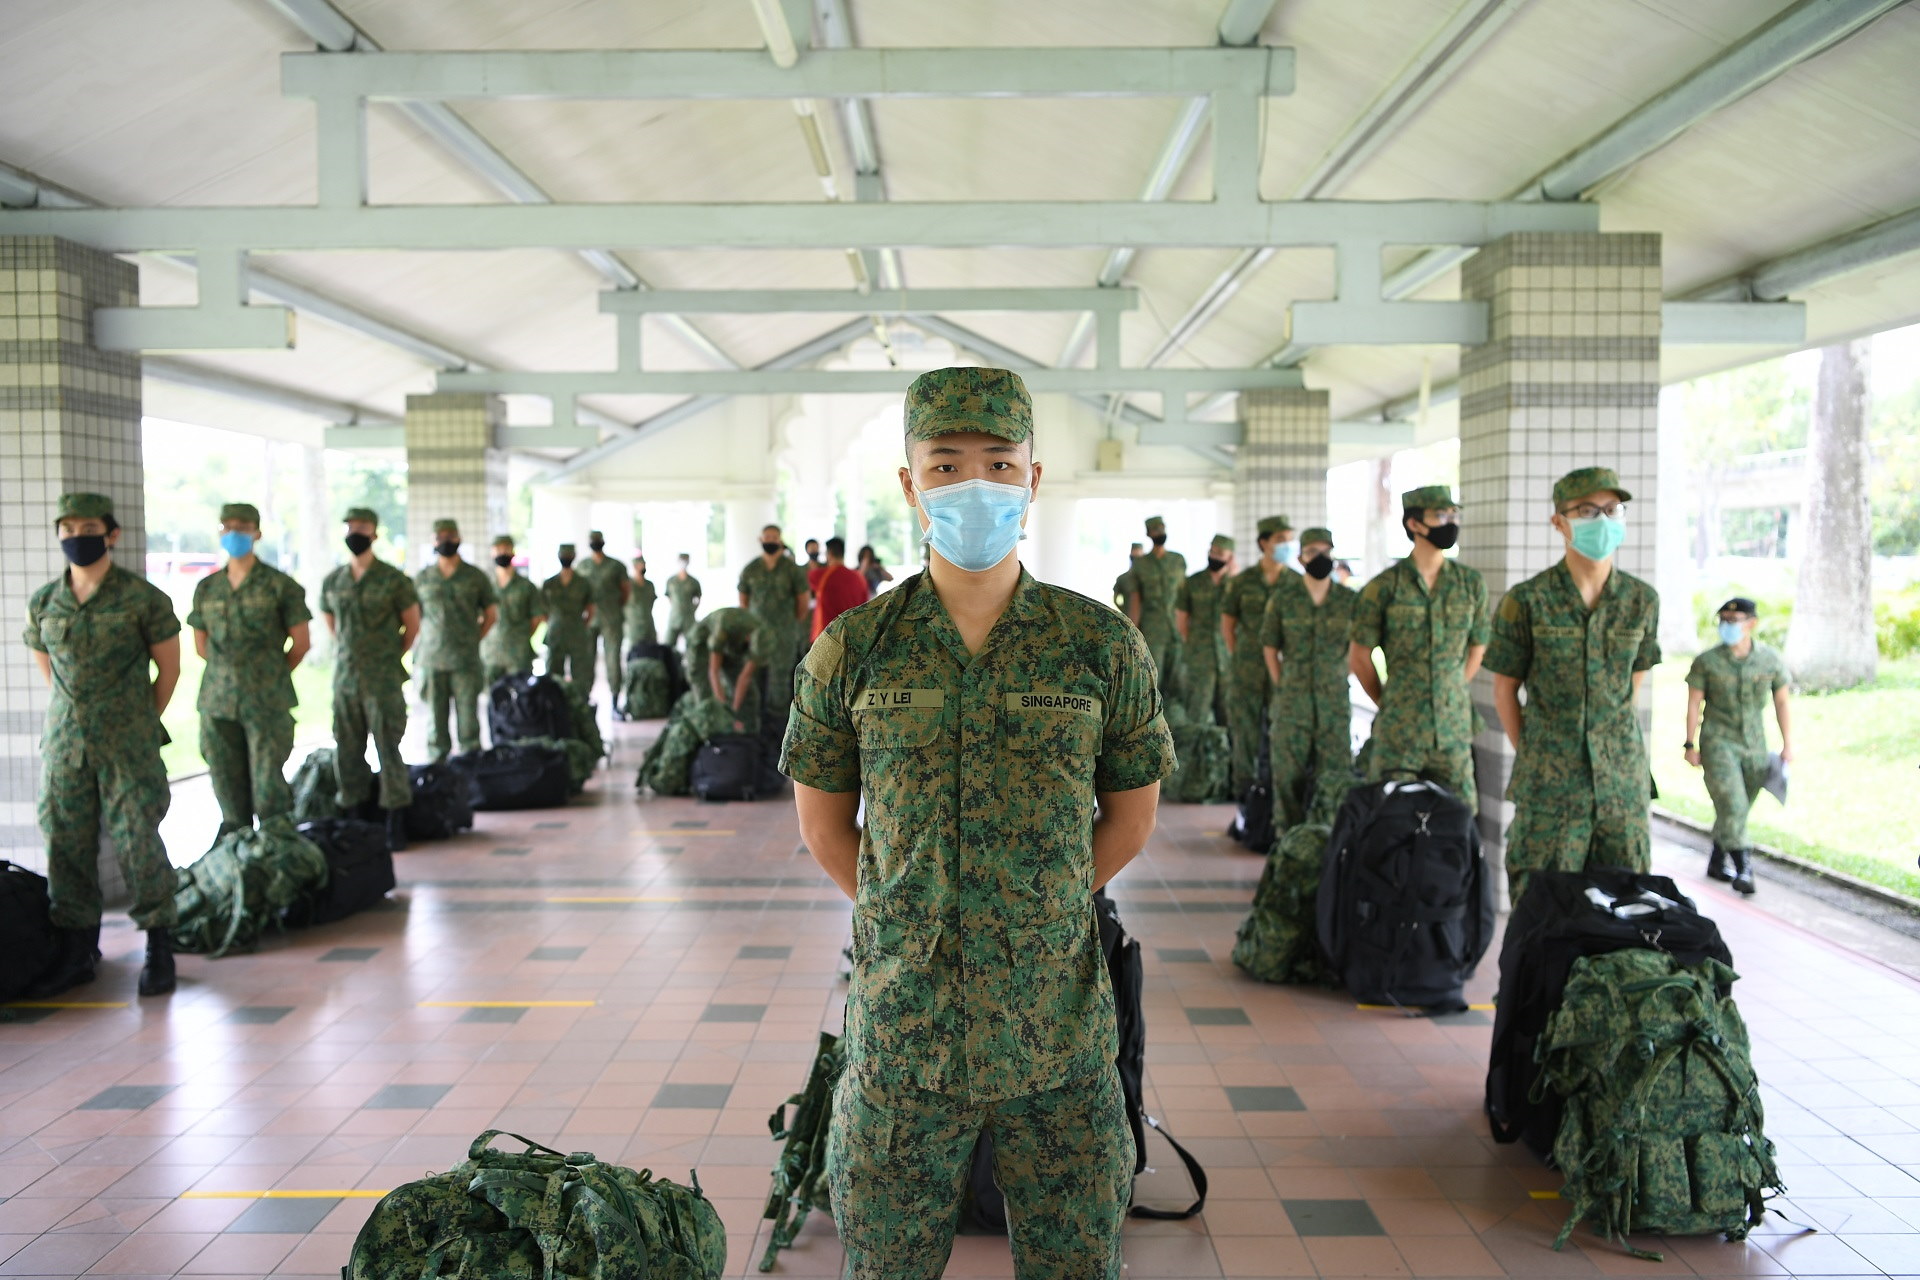 BMT resumes with stricter checks when booking in